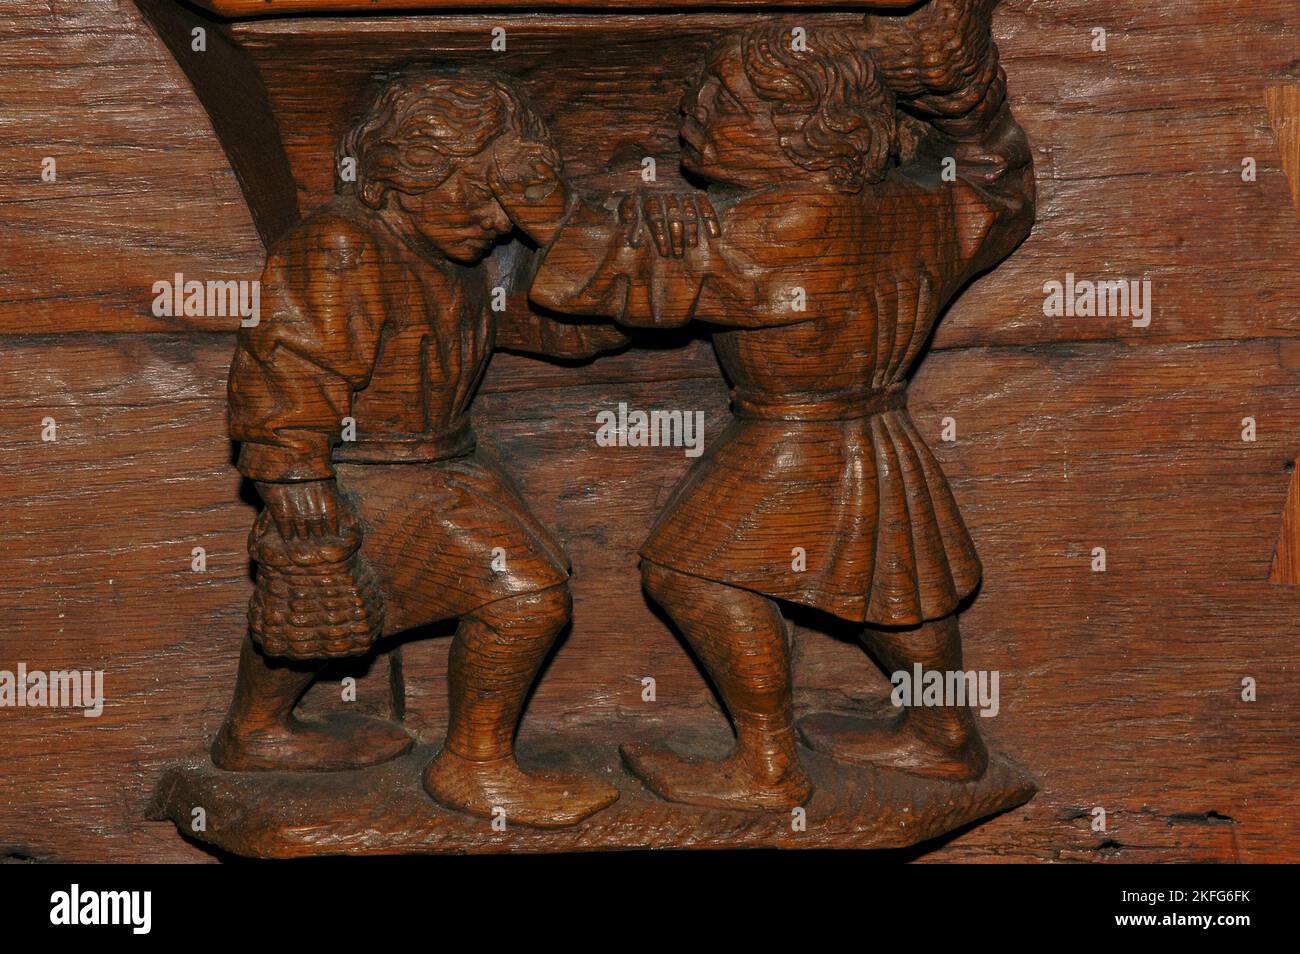 “One attacks while the other soothes”: old Dutch proverb or saying illustrated by sculpted misericord beneath choir stall seat in the Oude Kerk (Old Church) in Ouderkerksplein, Amsterdam, Netherlands.  Two men fight while holding baskets - but one calms his opponent’s brow. Stock Photo